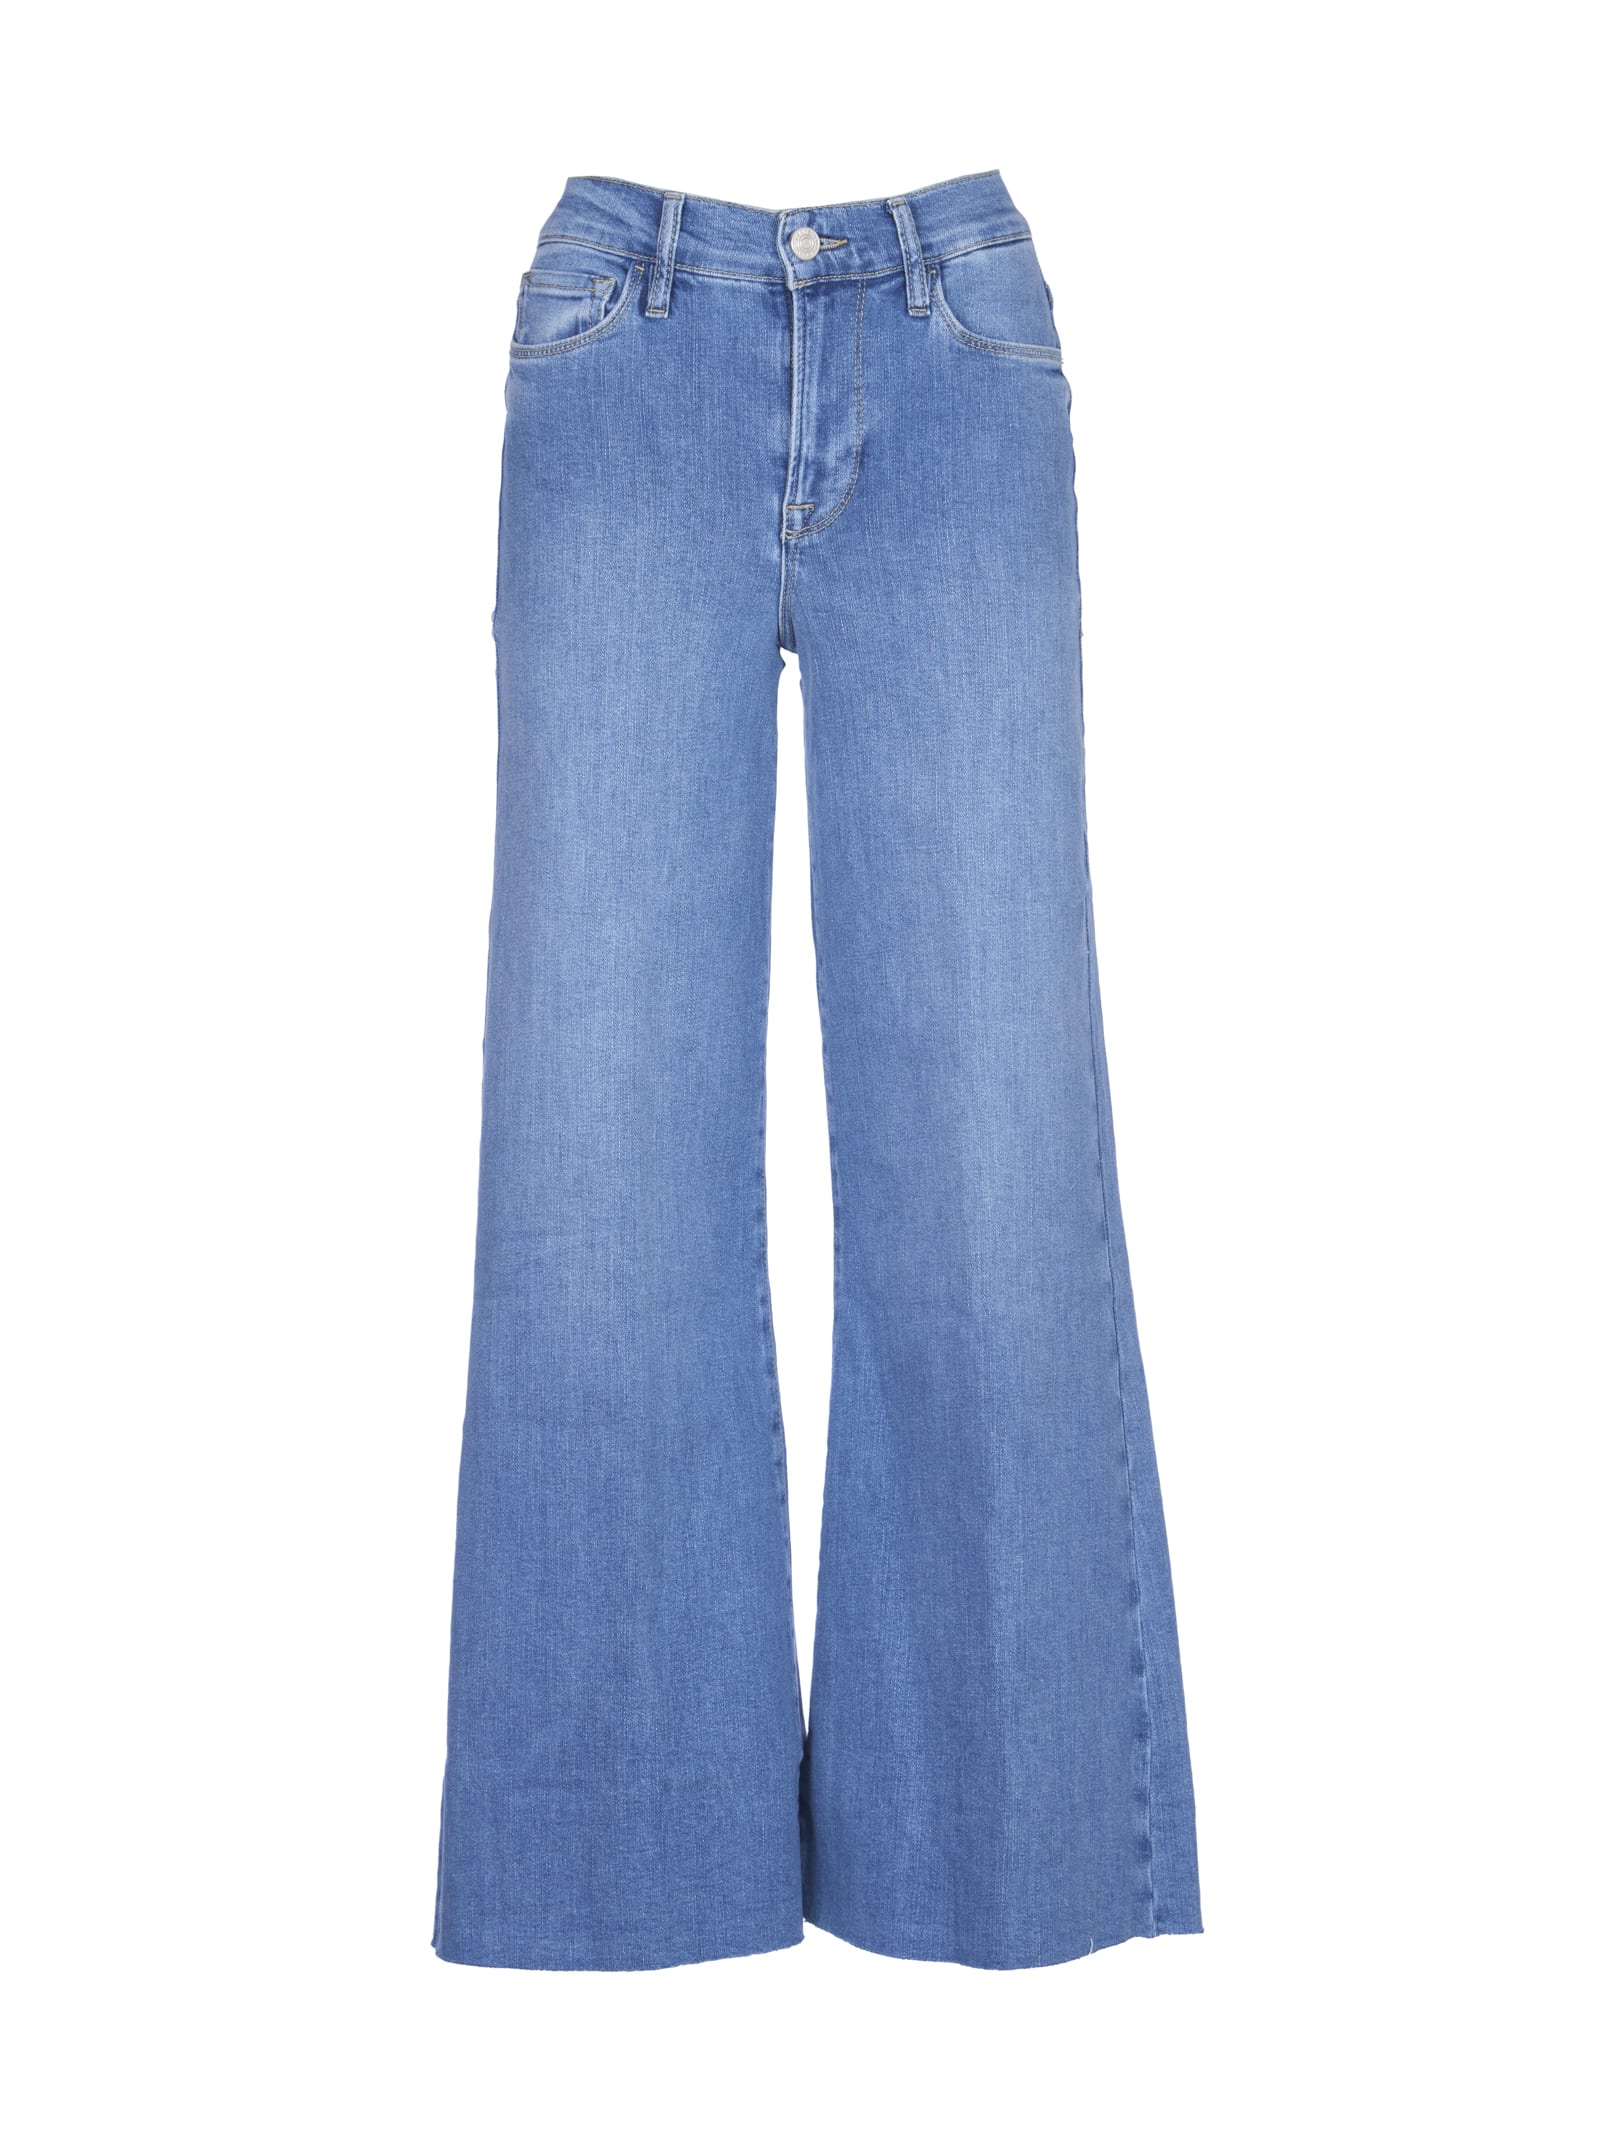 FRAME PALAZZO CROP HIGH-WAISTED JEANS